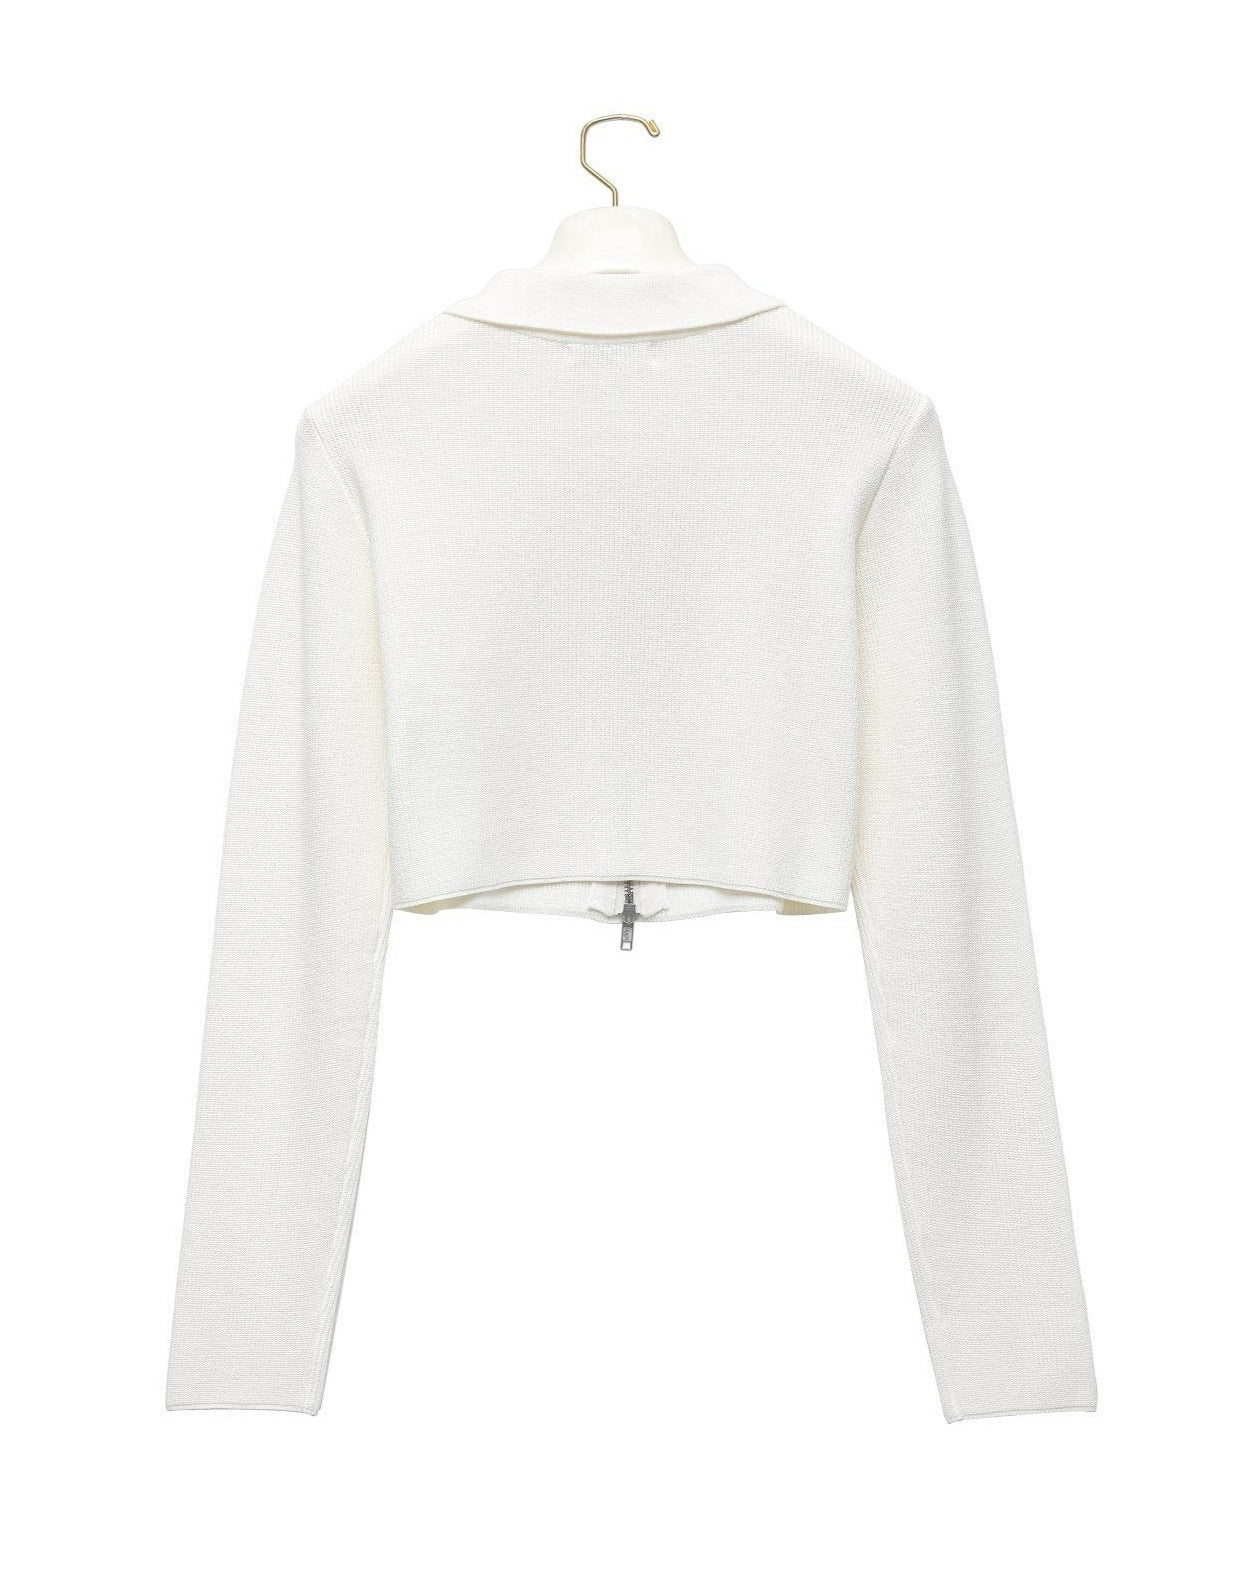 [PAPERMOON] SS / Two Way Zipped Detail Cropped Cardigan